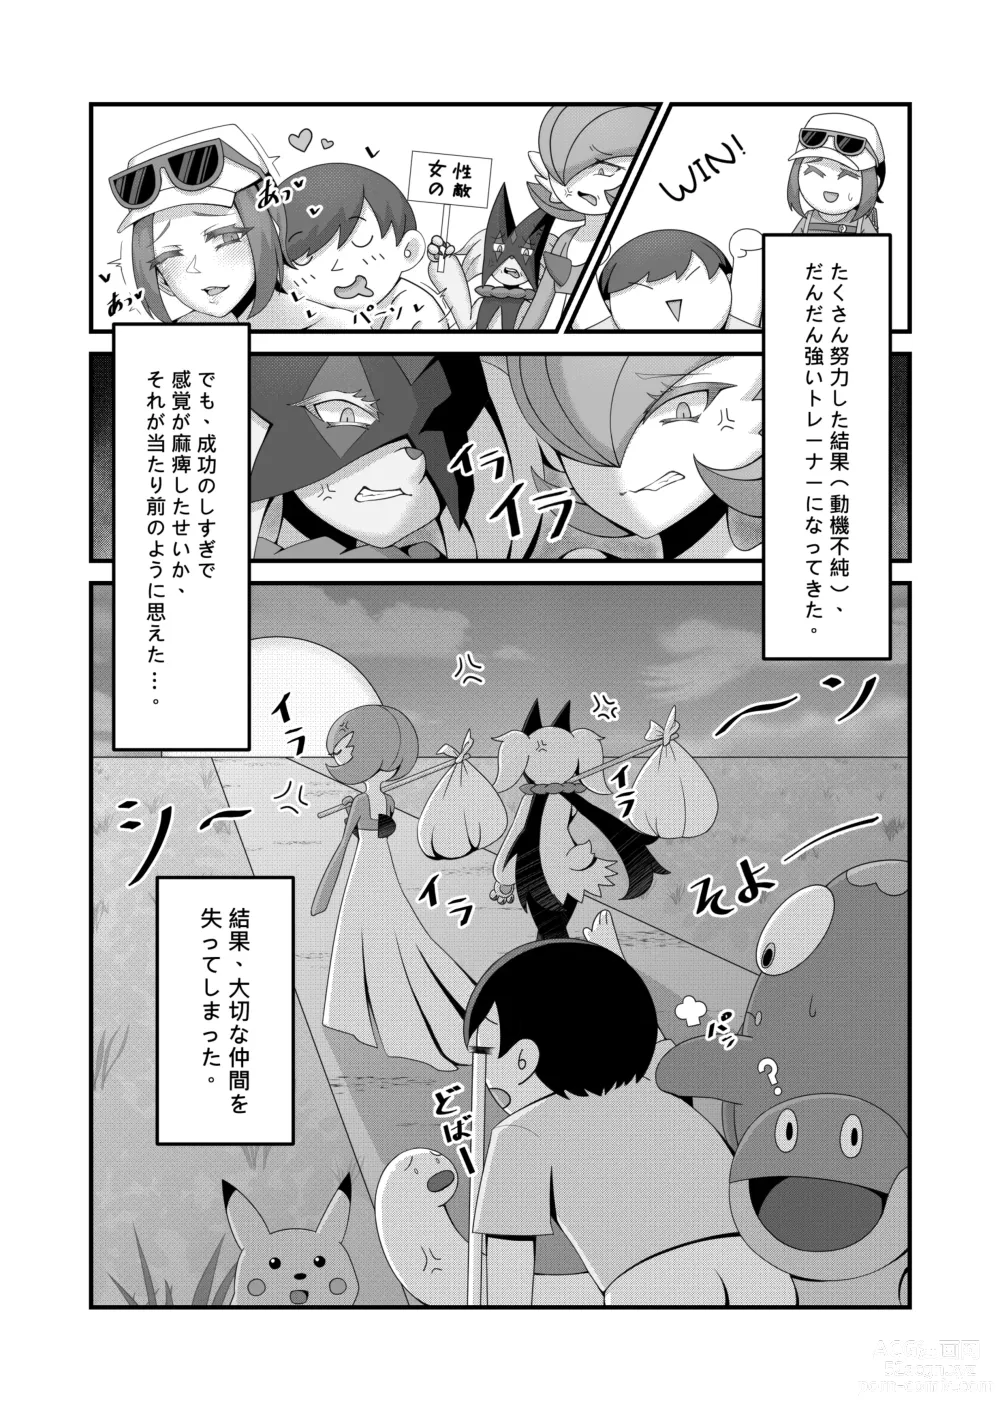 Page 2 of doujinshi Sex after Versus？ - ミモザ & キハダ